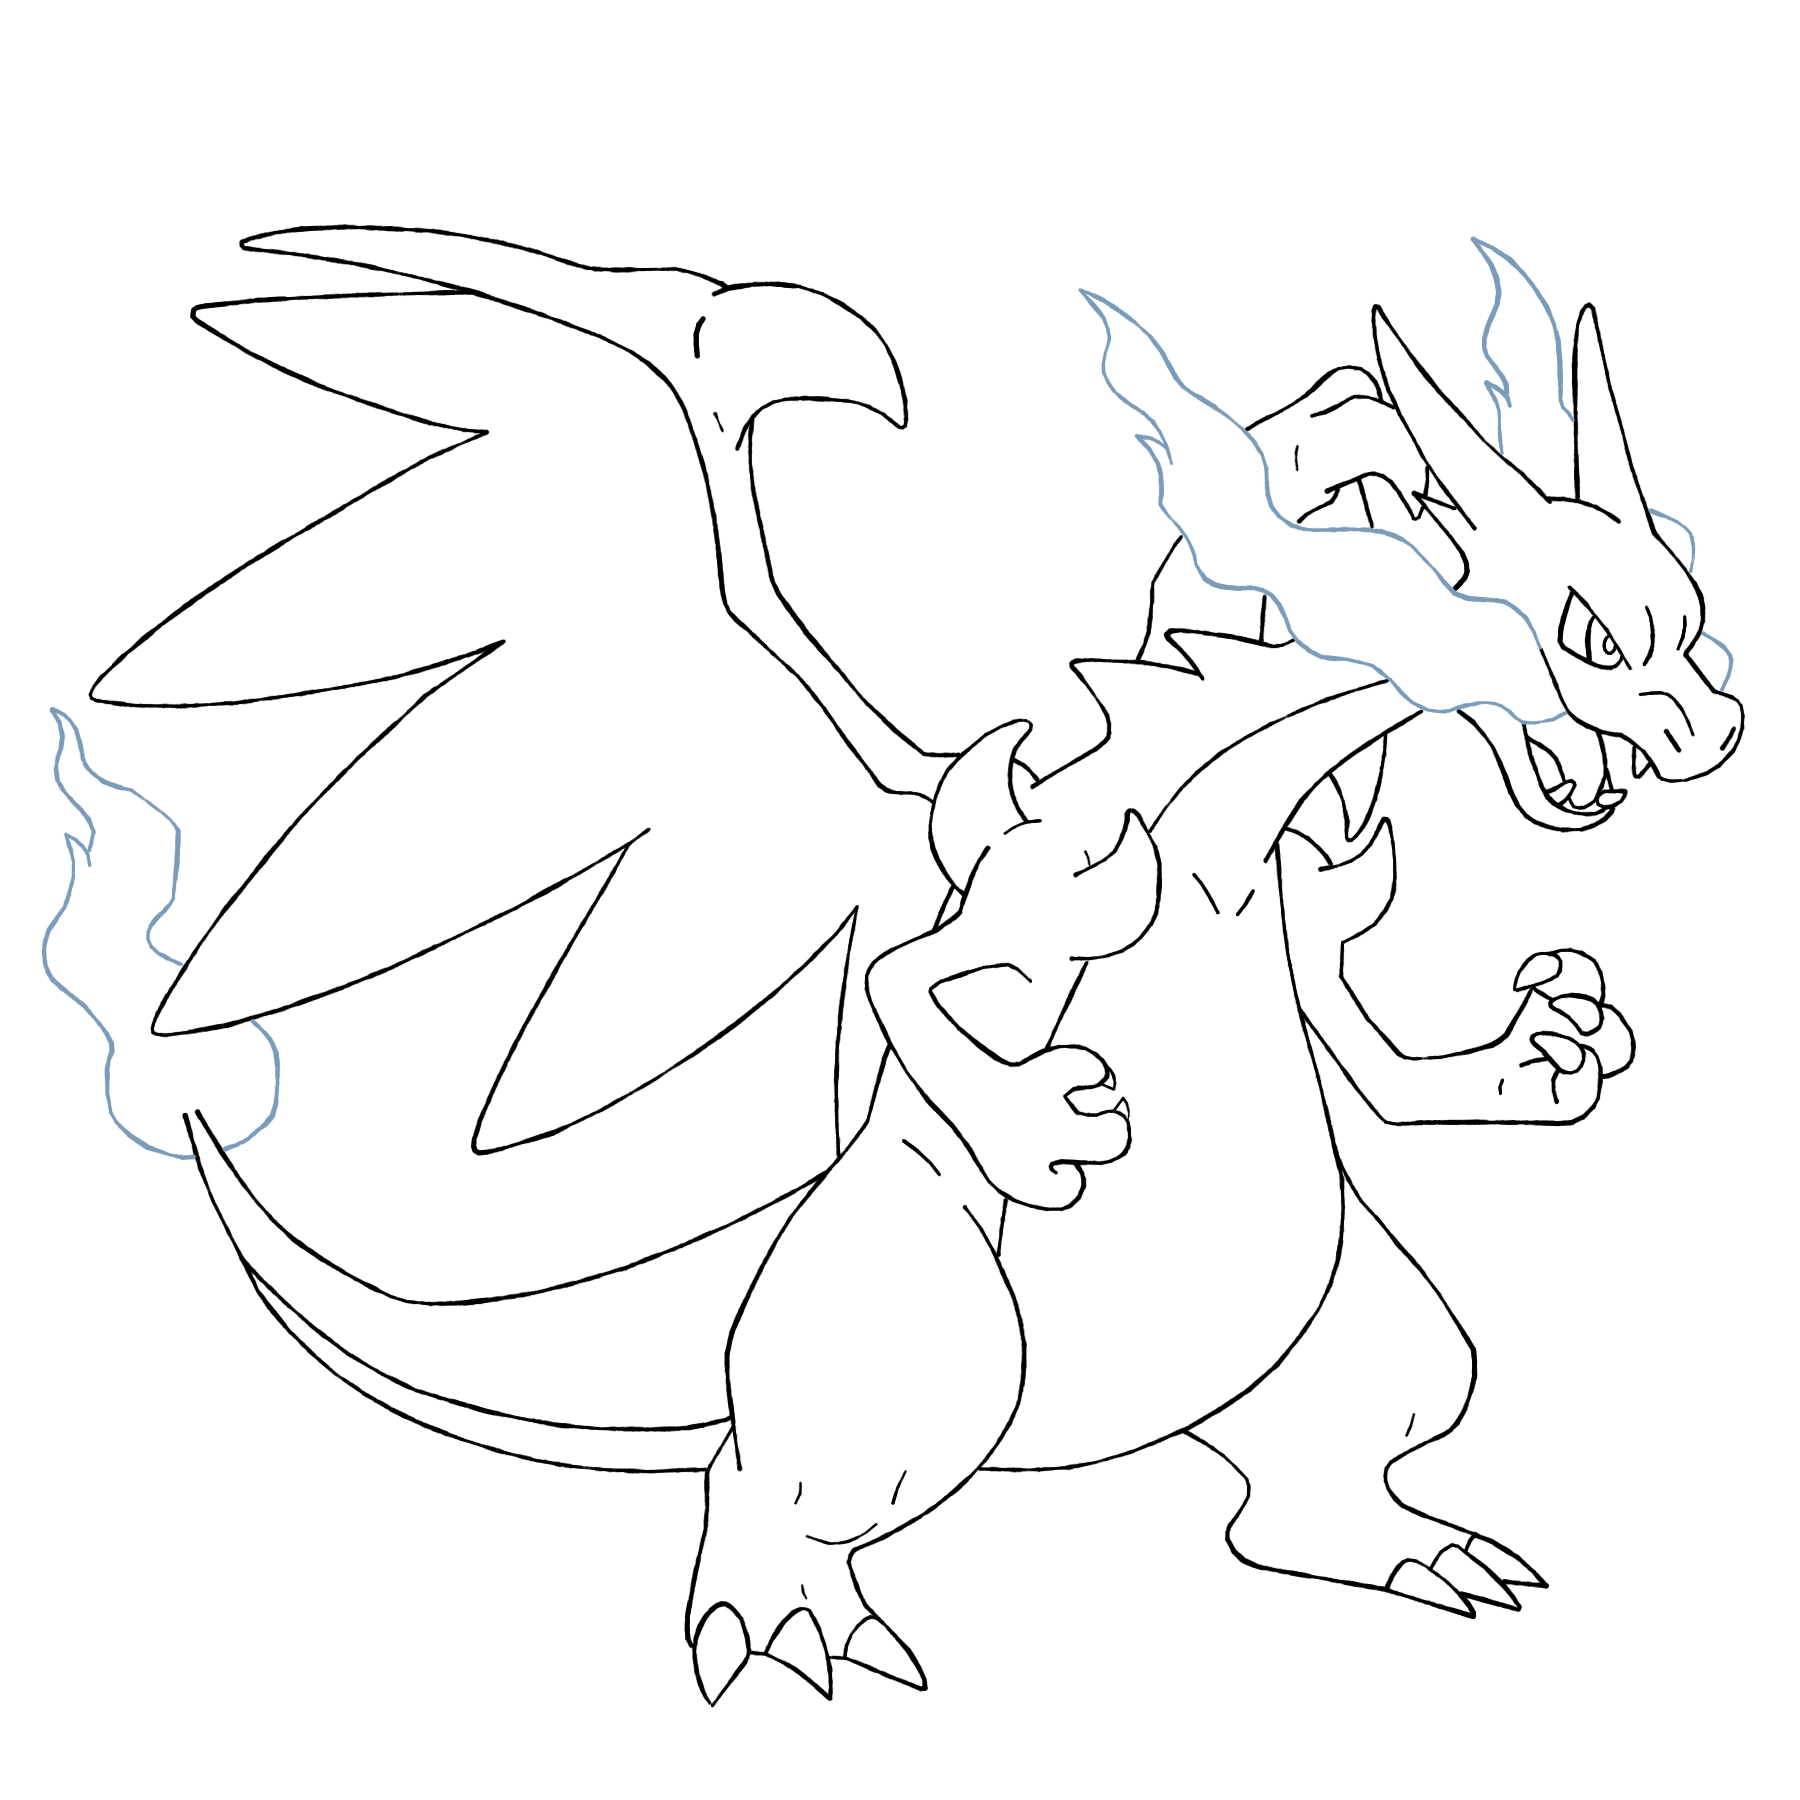 Free Mega Charizard X Coloring Page, Download Free Mega Charizard X